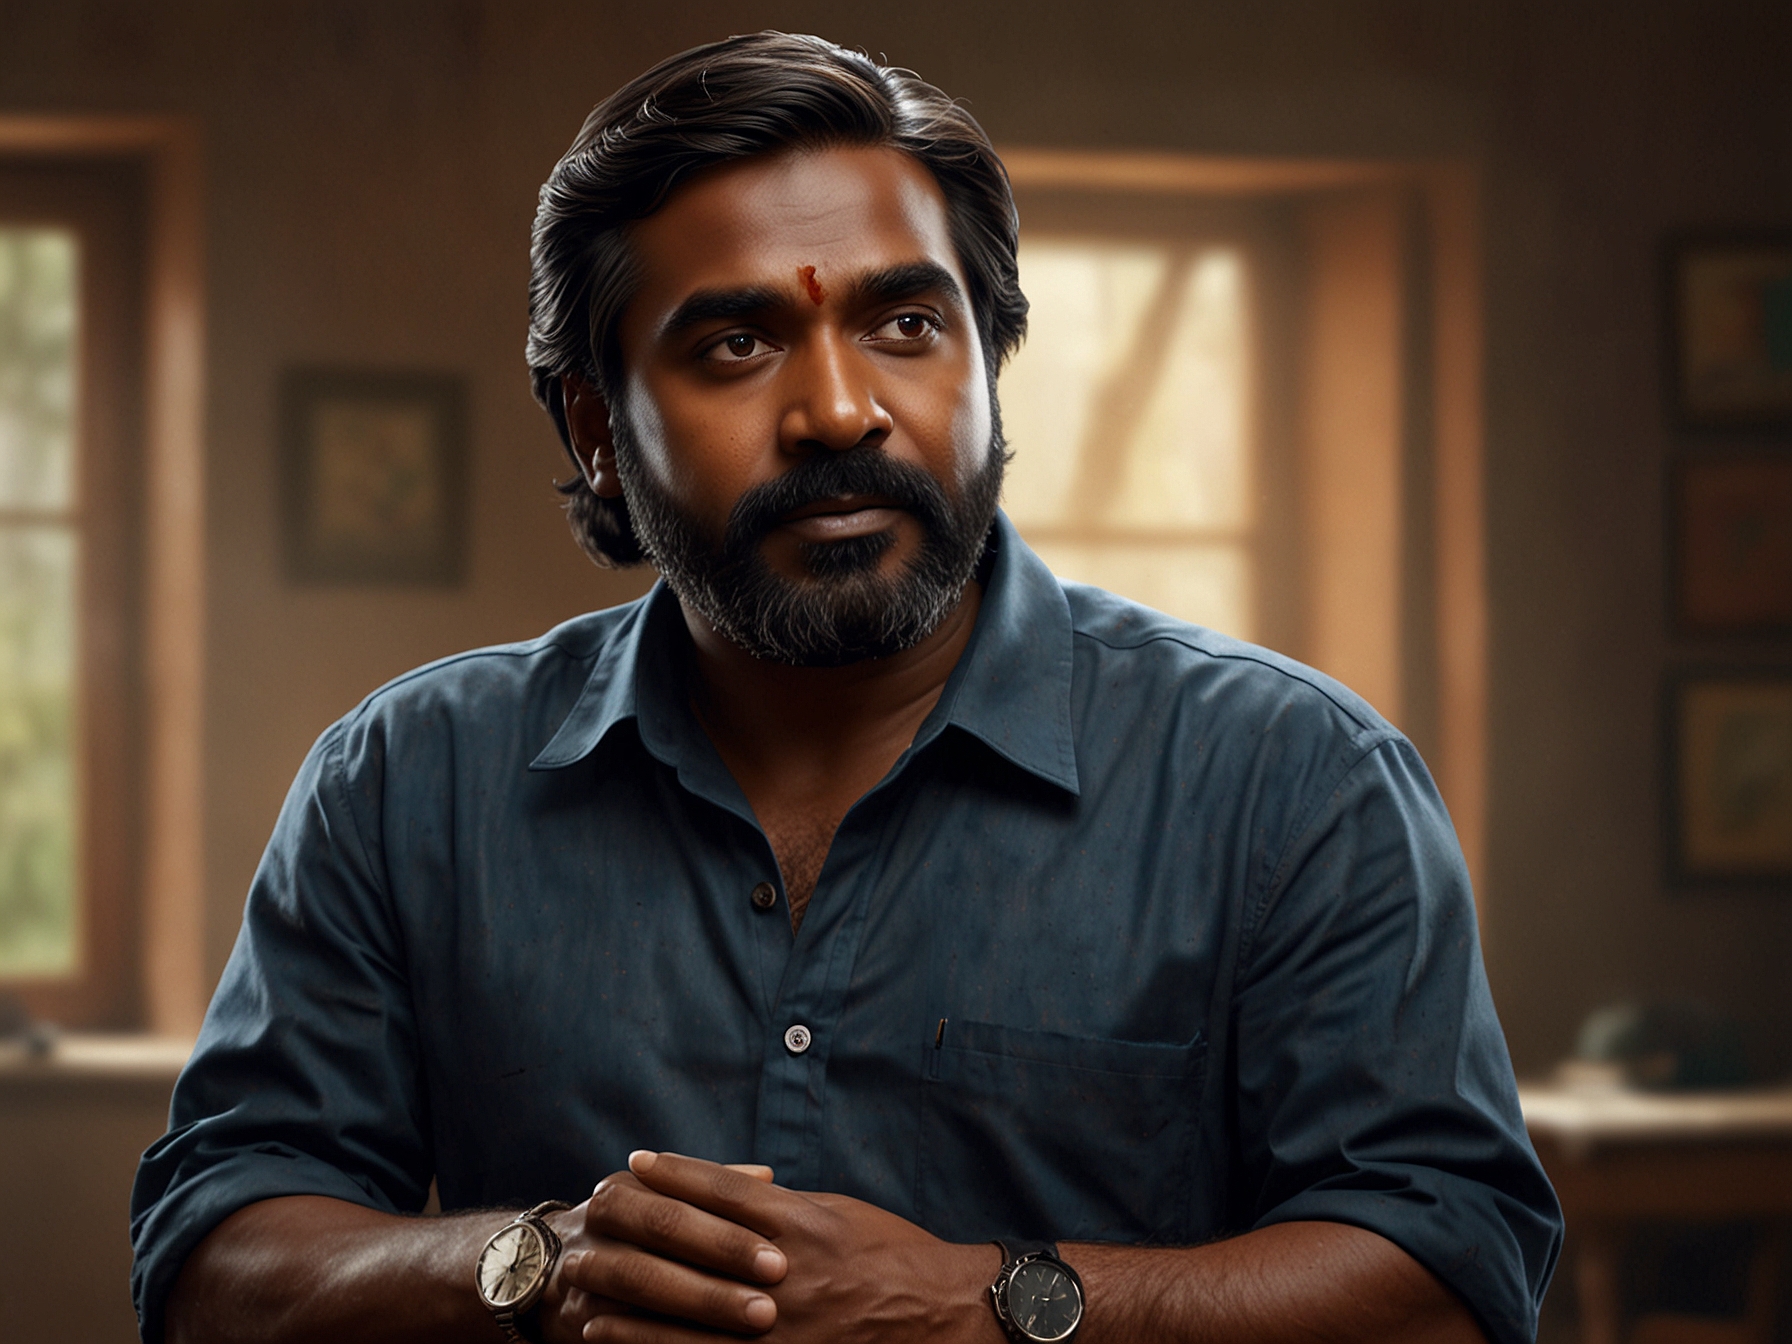 Vijay Sethupathi in a parental role on the set of 'Maharaja', capturing his unique expression of fatherhood that profoundly affects his acting.